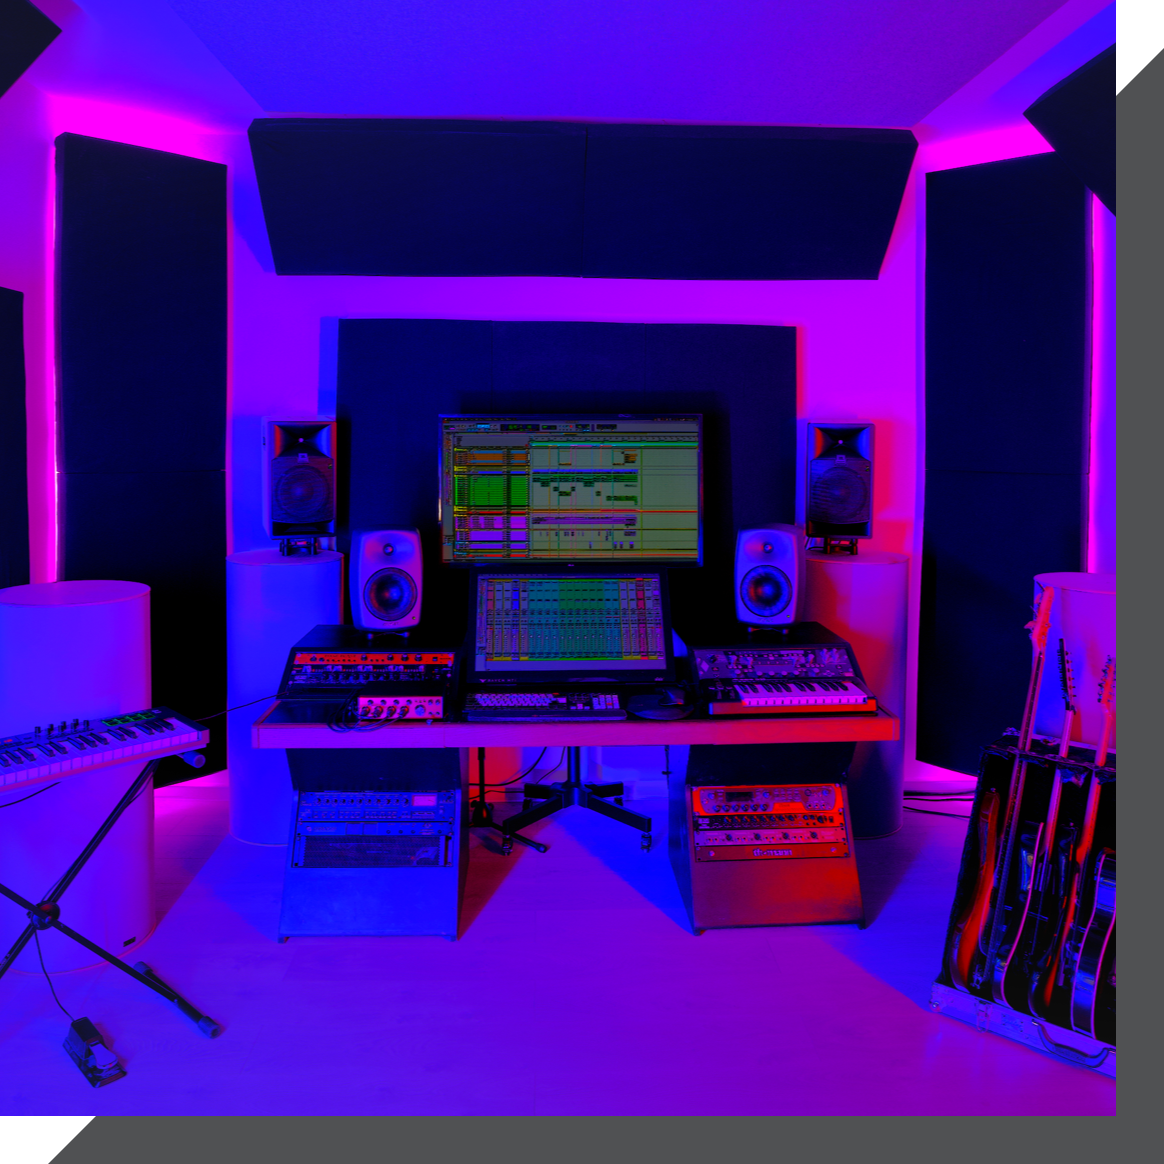 A recording studio in London with a central computer screen displaying audio software, surrounded by speakers, various keyboards, mixers, and six guitars standing in a rack. The room is illuminated with purple and blue lighting, creating a vibrant atmosphere.